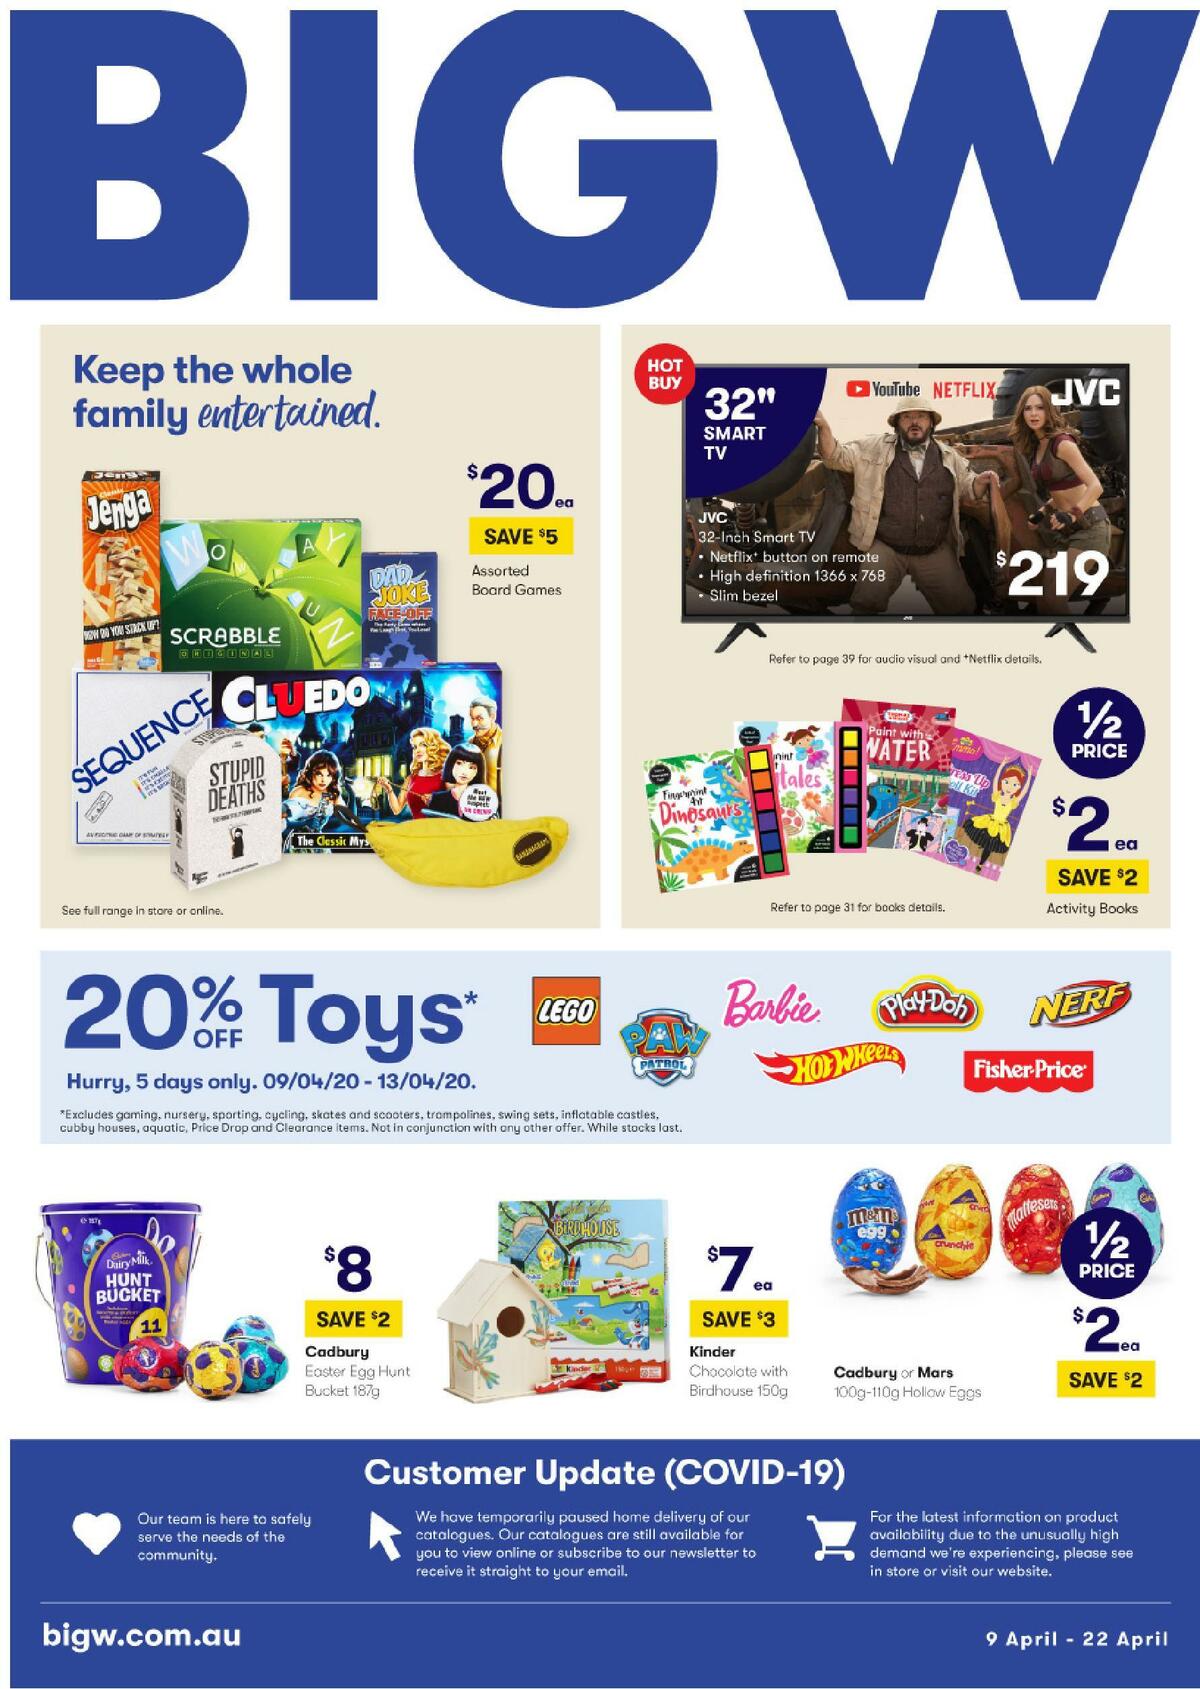 Big W Keep the Whole Family Entertained Catalogues from 9 April